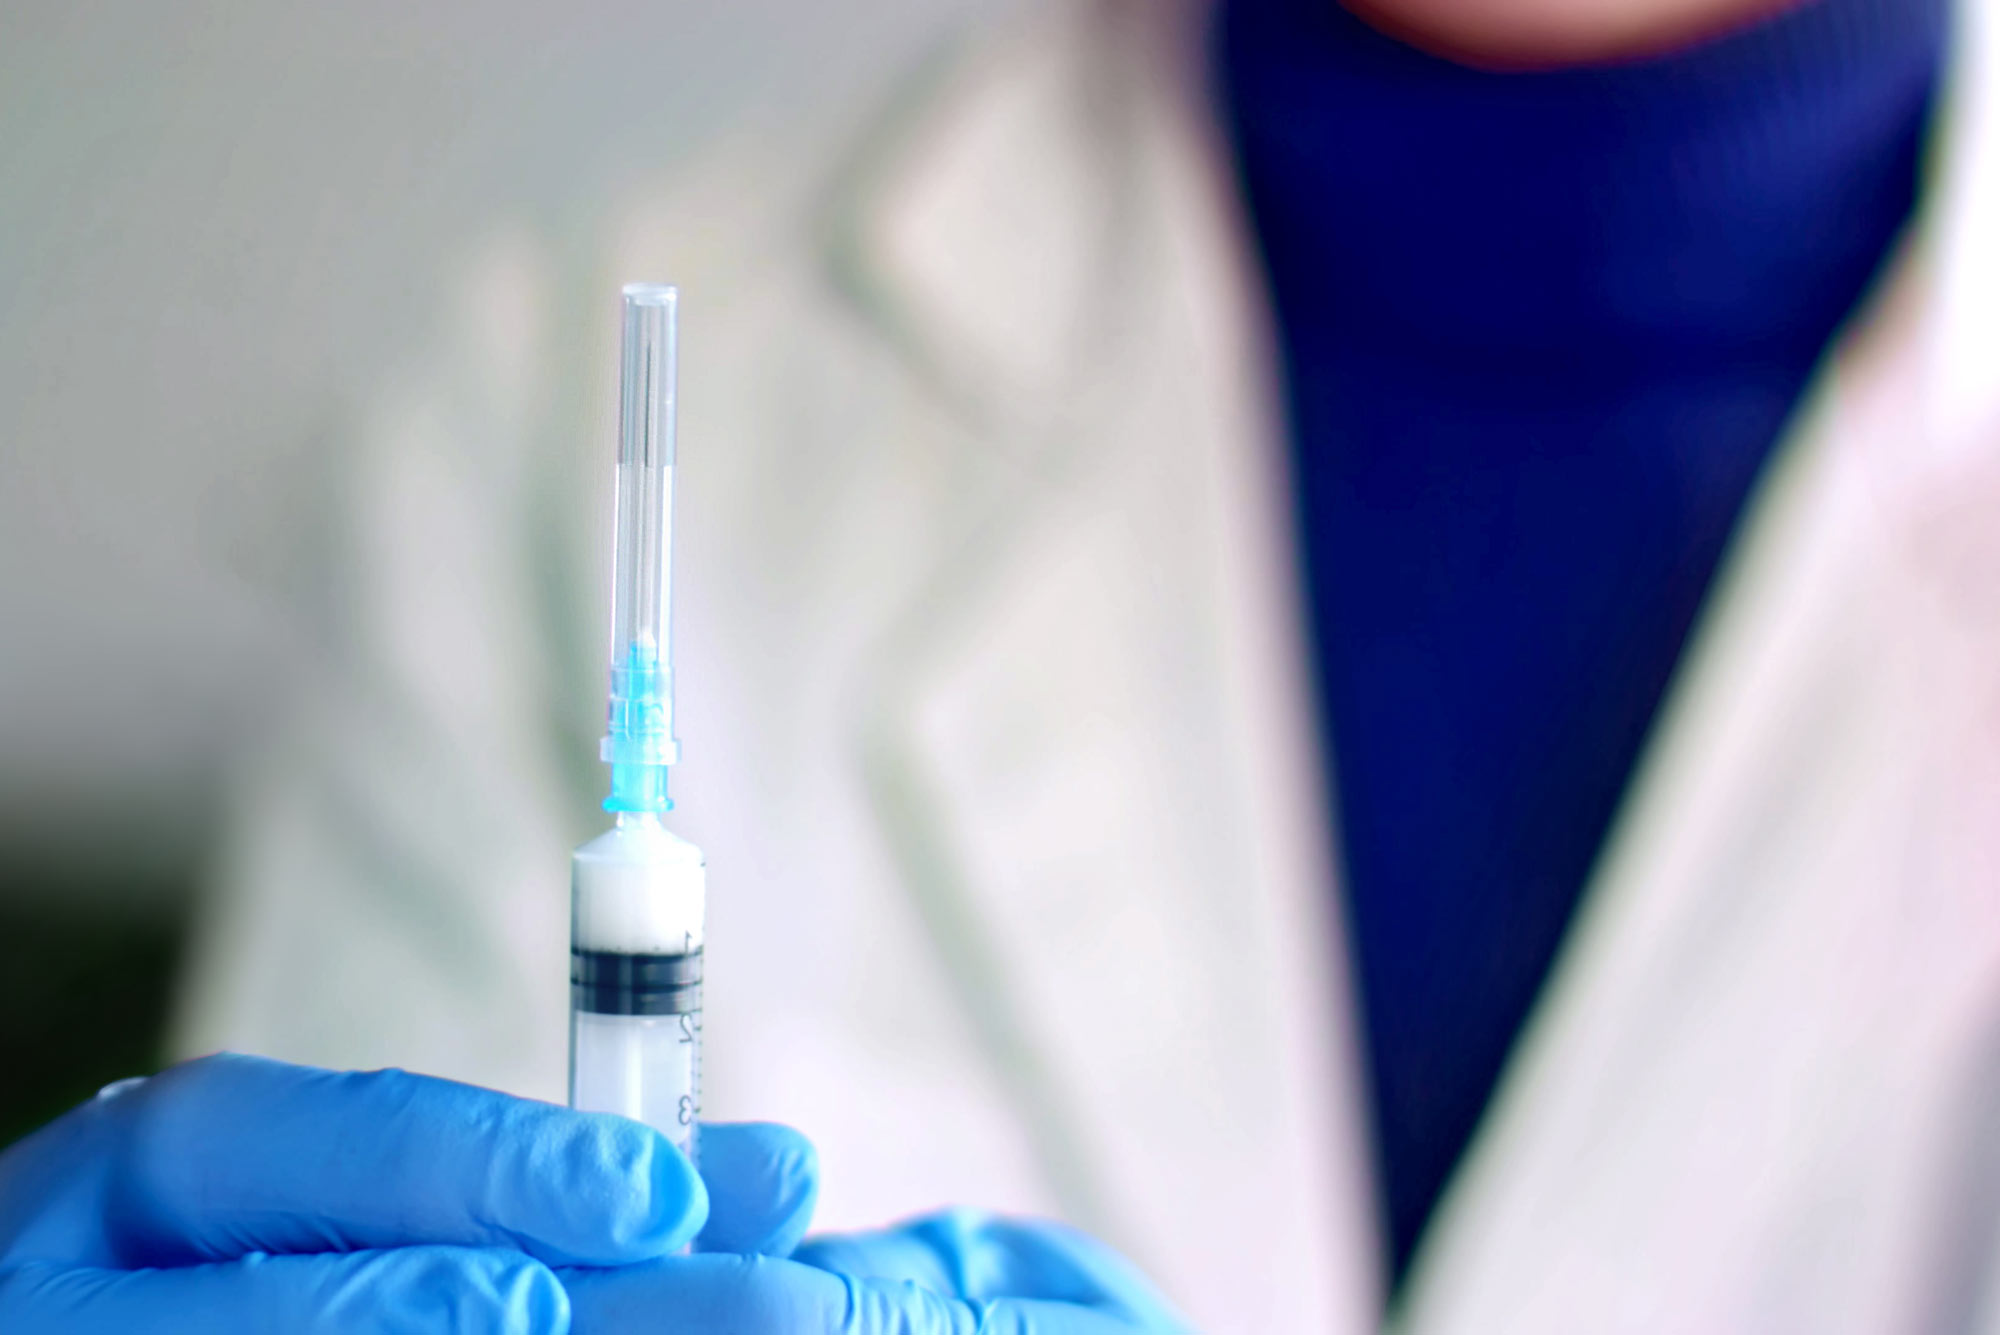 A photo of a doctor in a white lab coat and blue gloves holding up a capped syringe